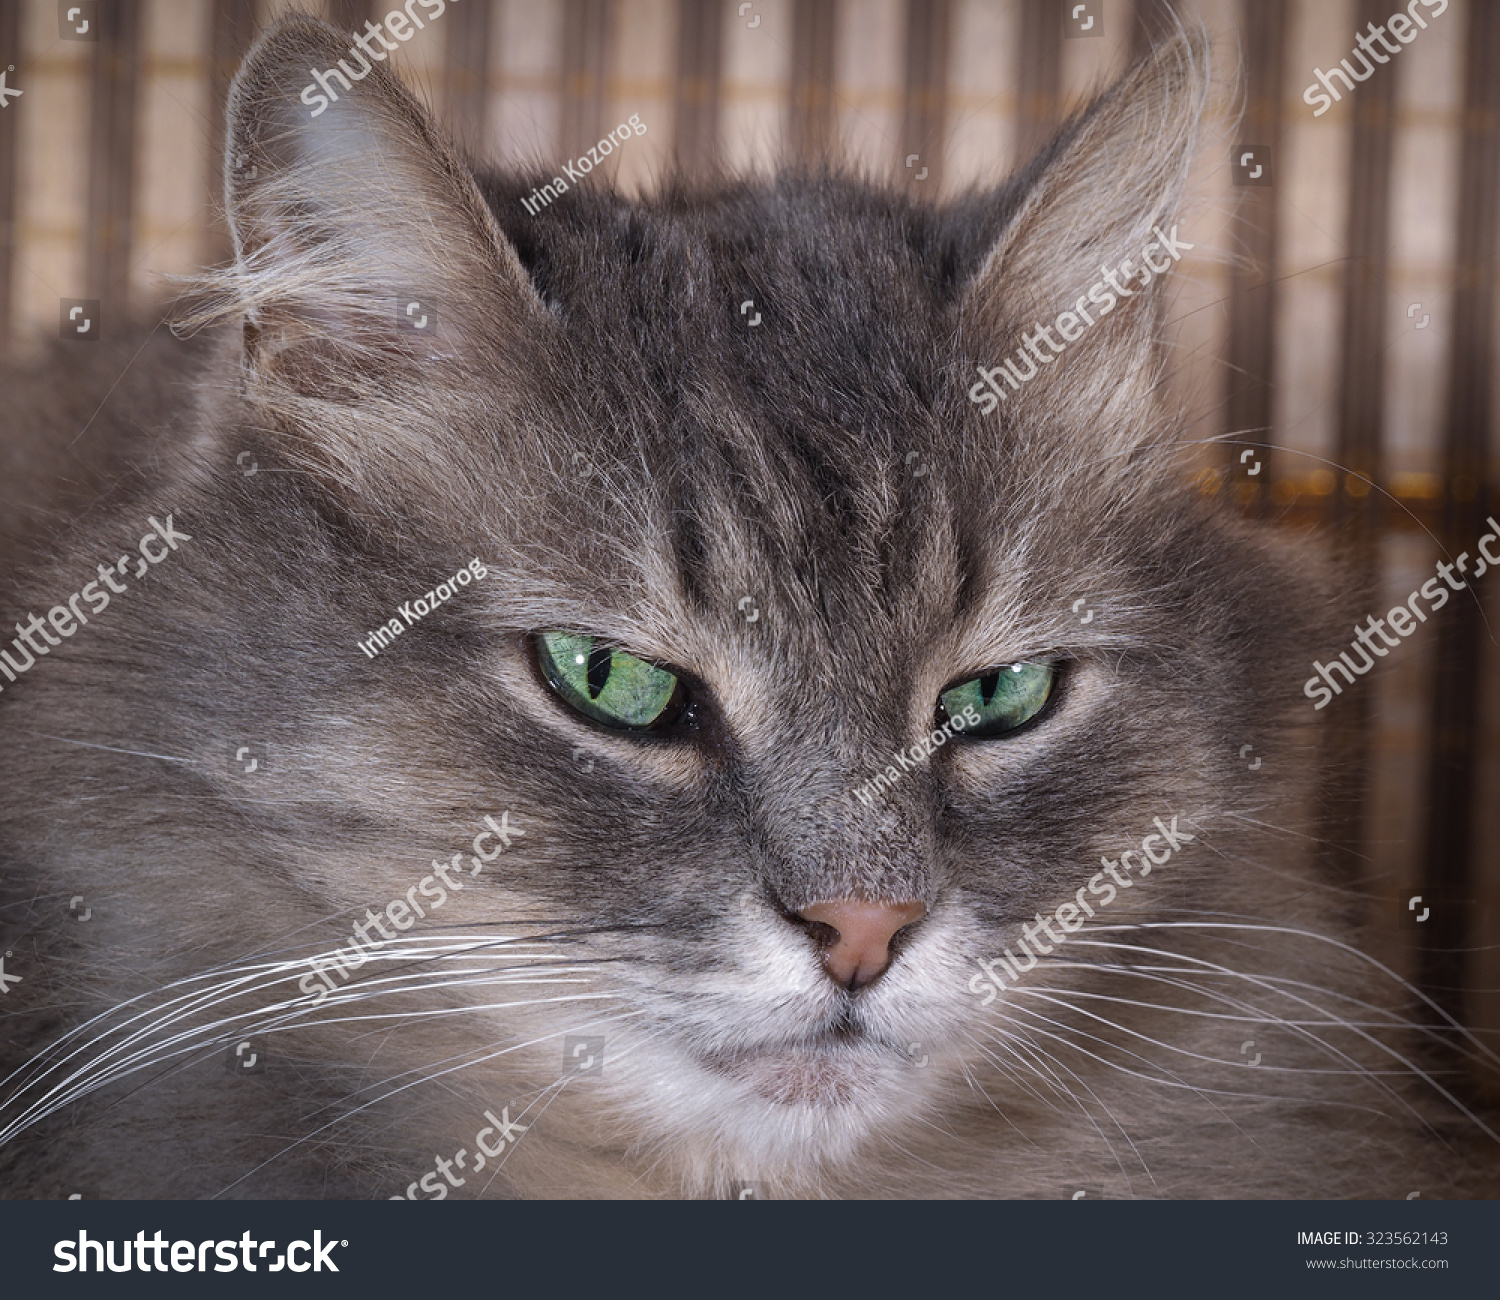 Albums 95+ Images fluffy grey cat with green eyes Stunning